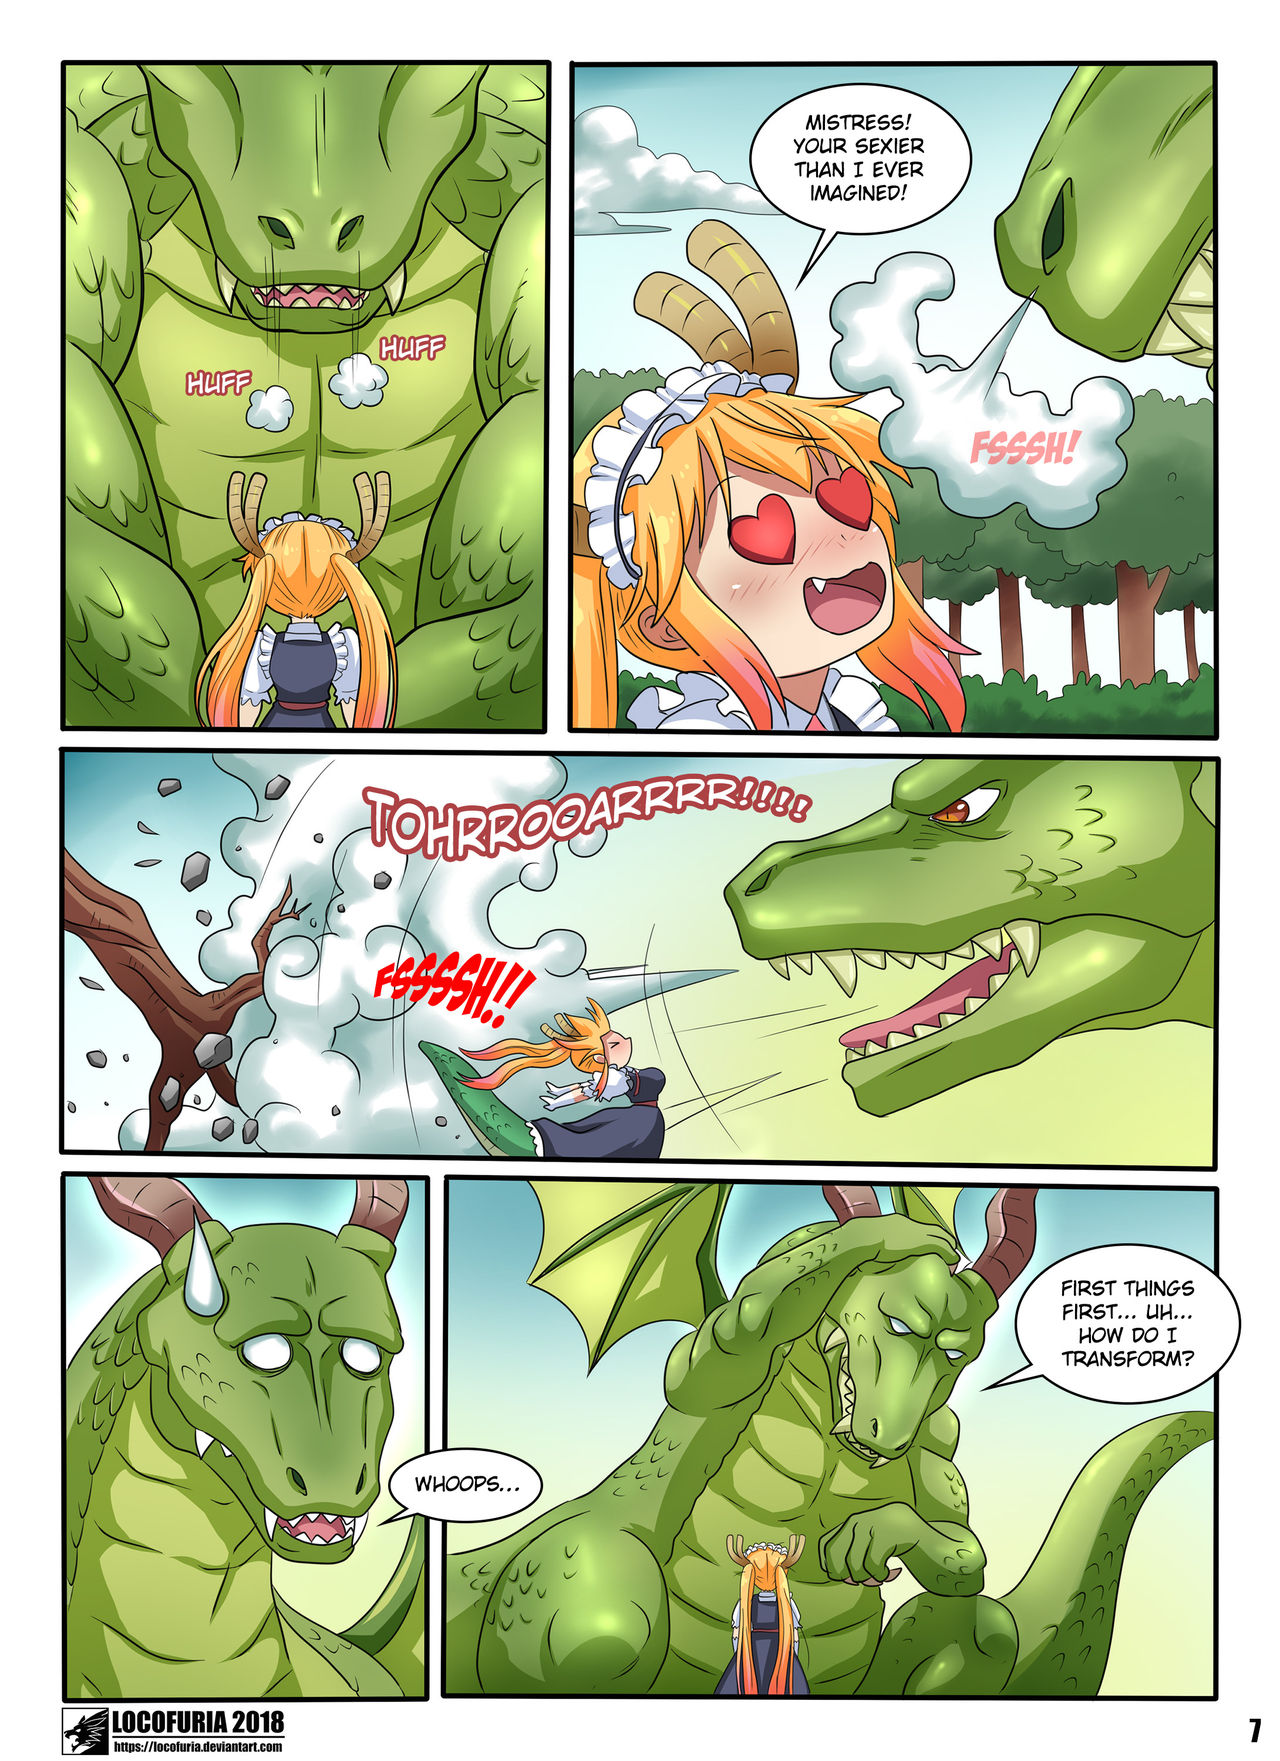 A Dragons Tale - Page 9 - HentaiEra